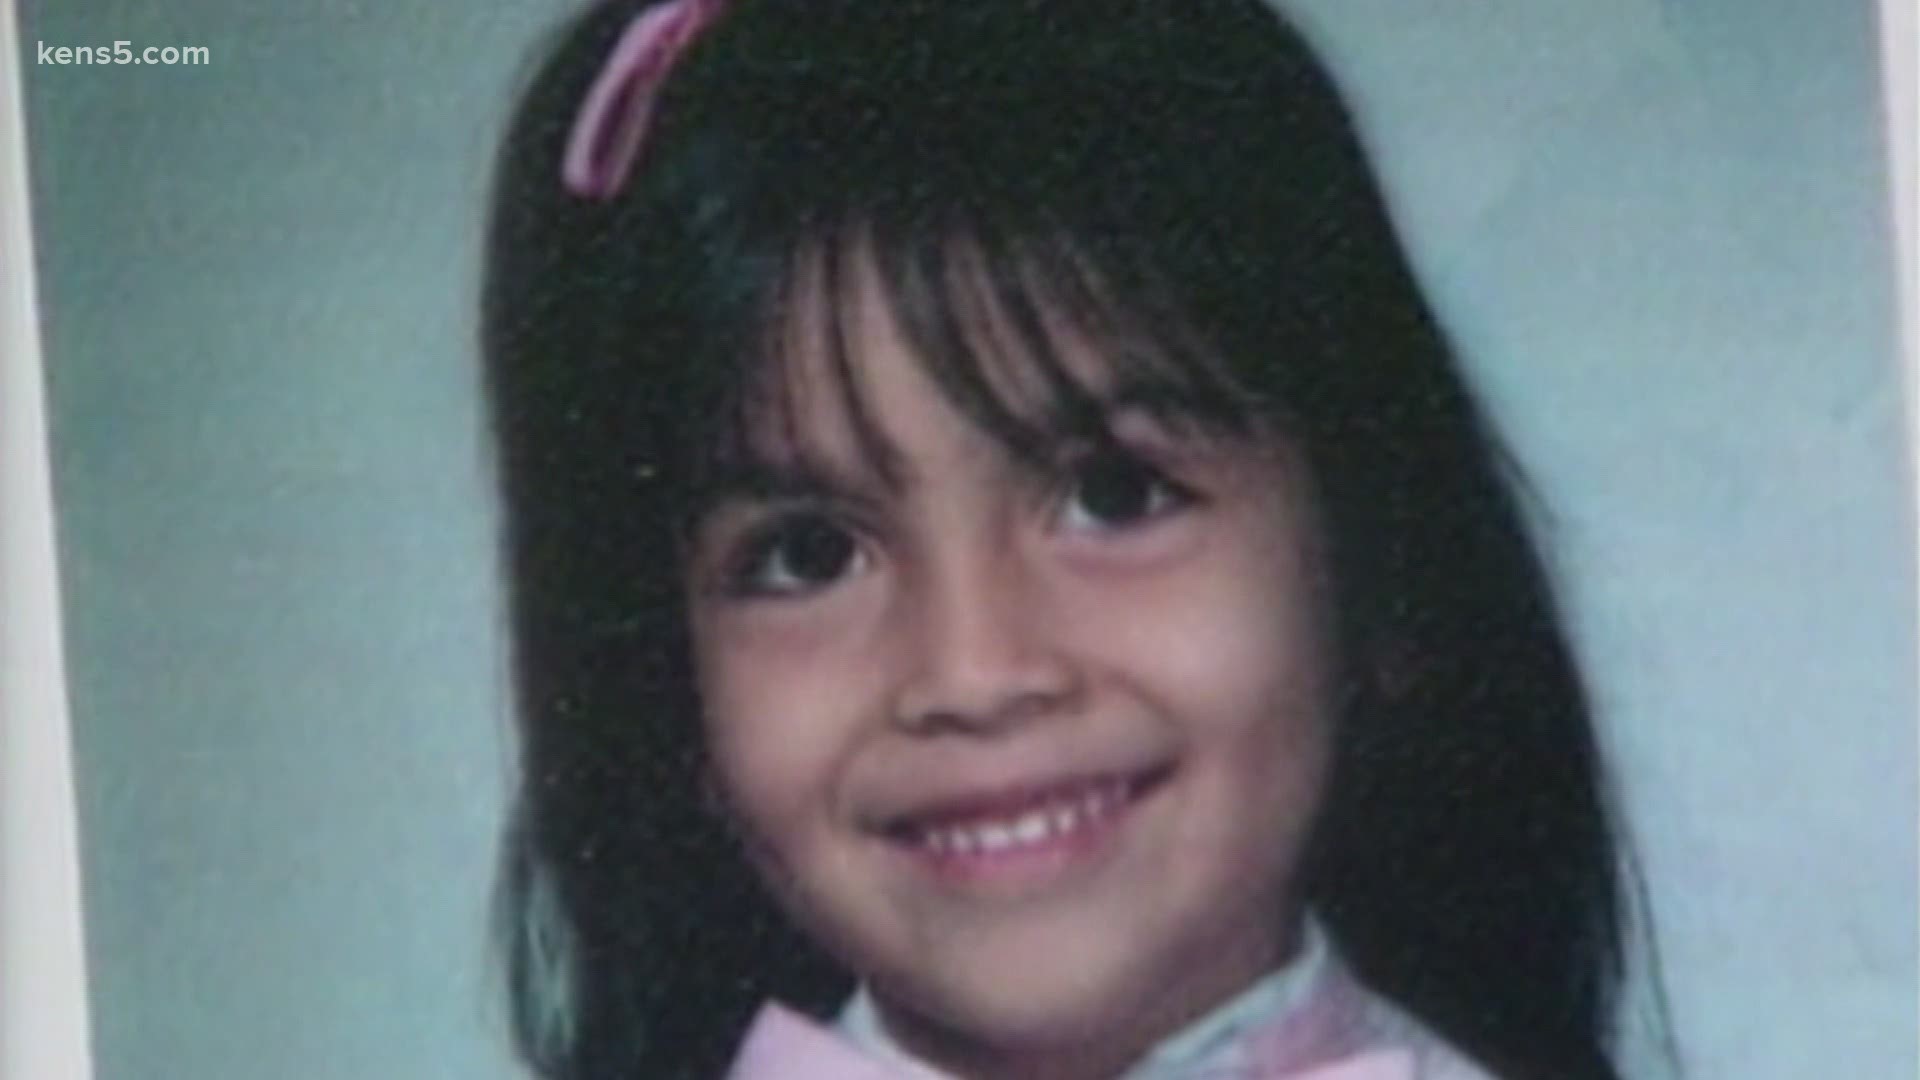 30 years after unsolved murder of young San Antonio girl, effort underway  to establish roadway in her name 